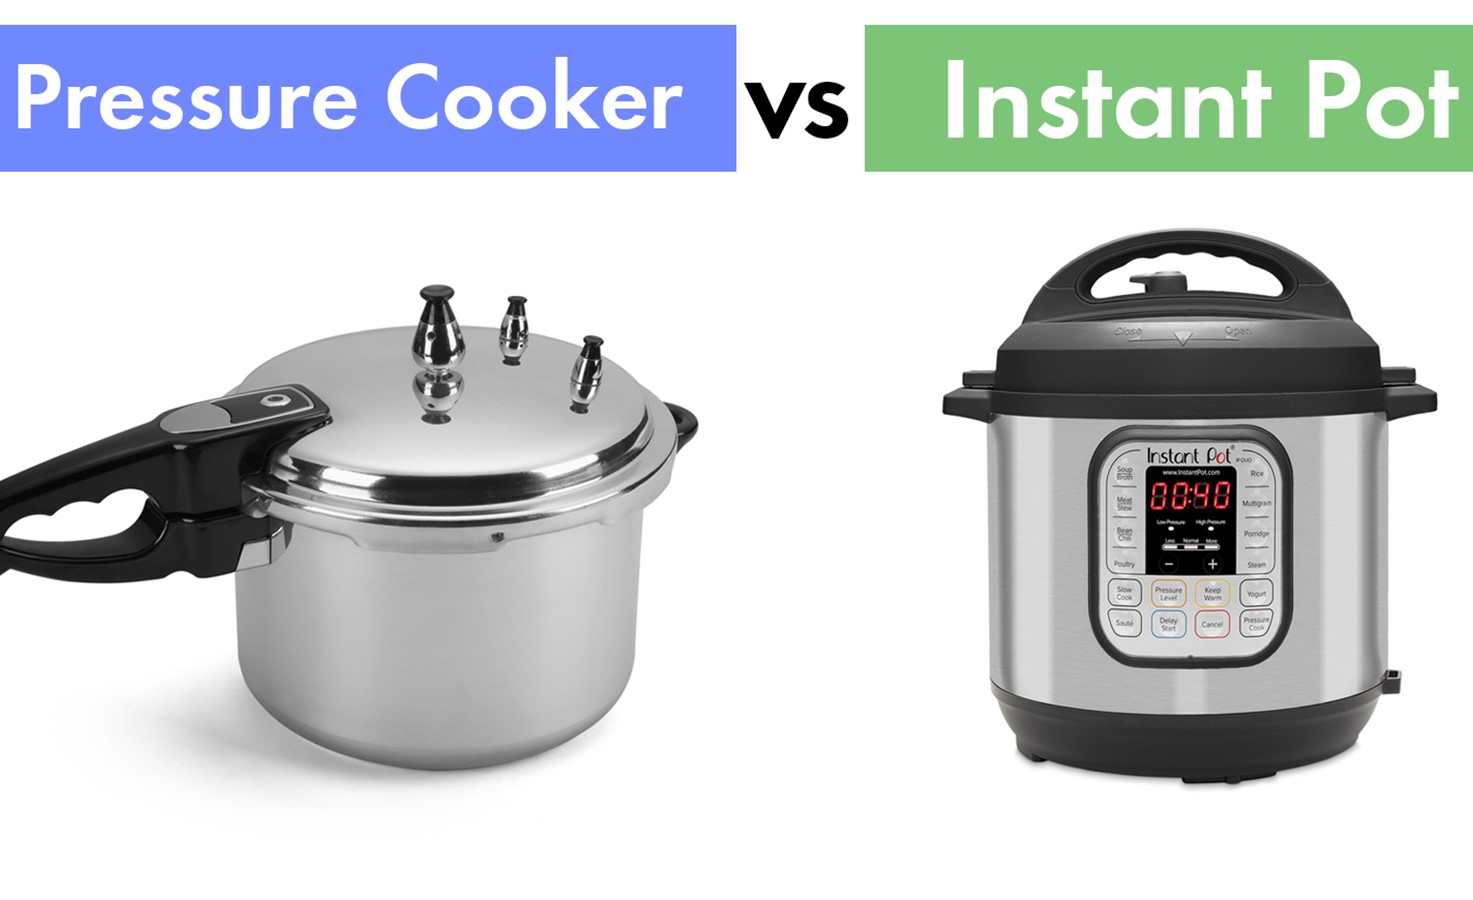 7-in-1 Pressure Cooker Vs. Instant Pot: What's The Difference?